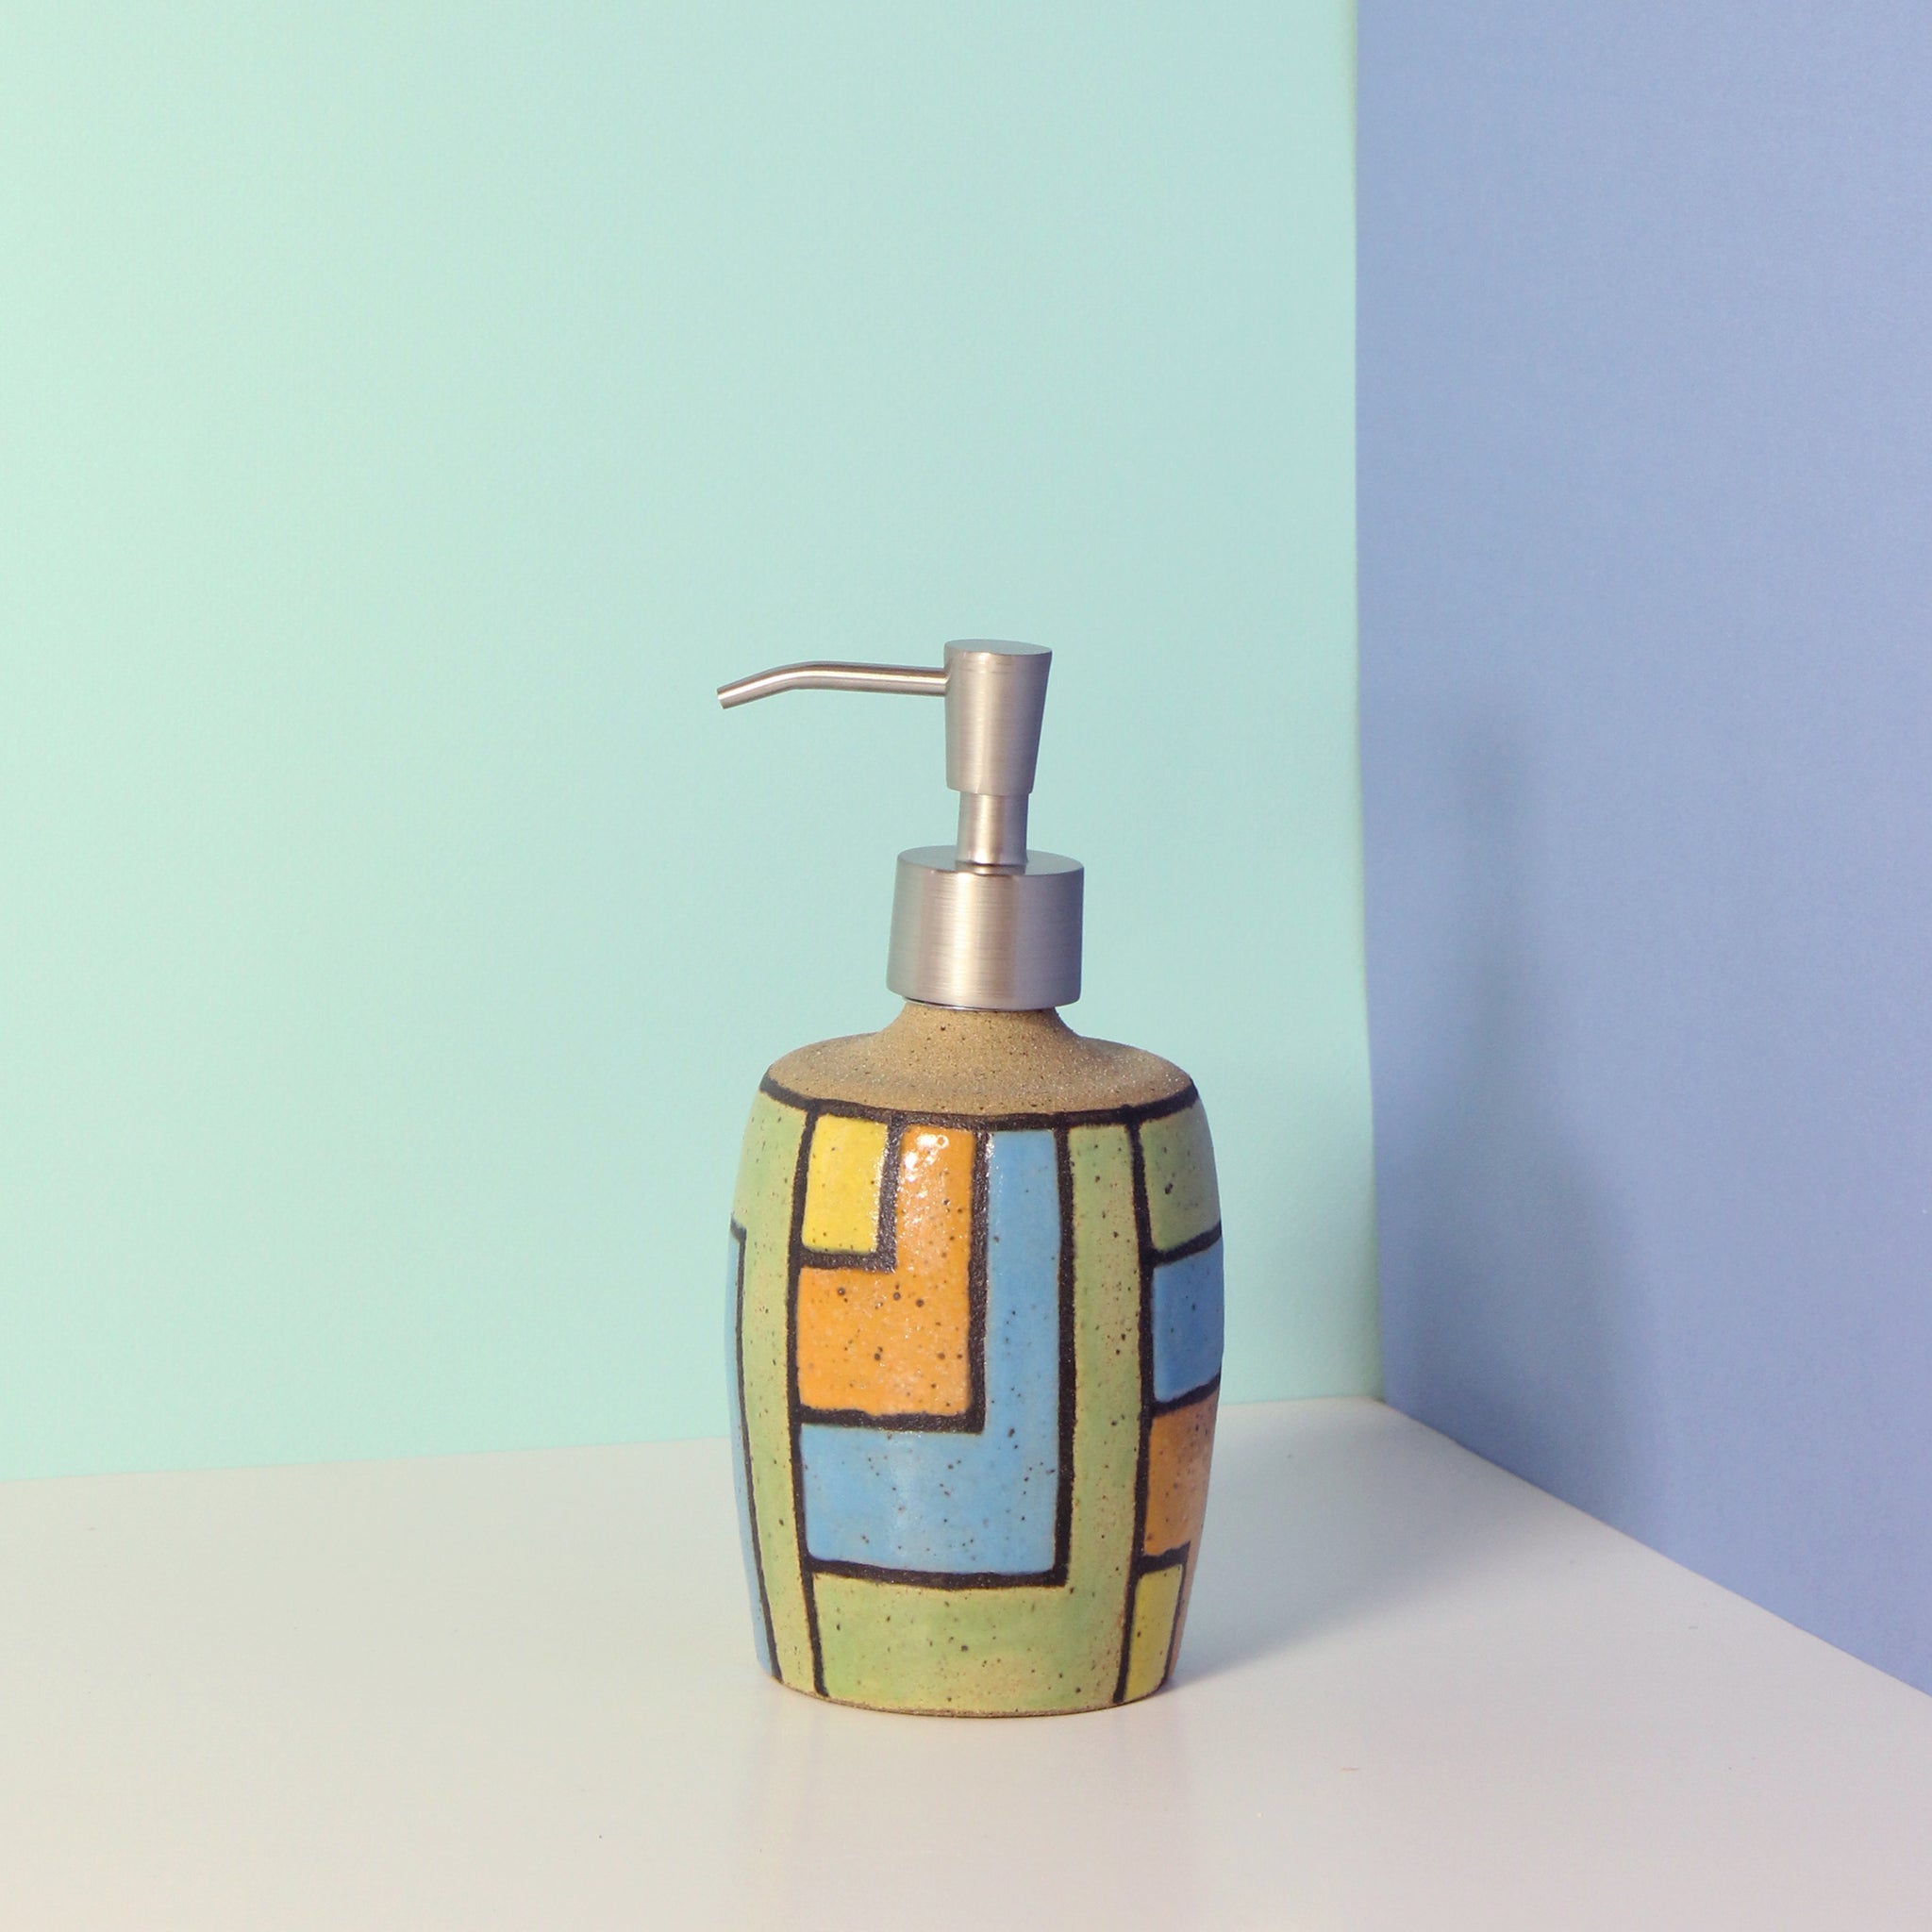 Glazed Stoneware Soap Dispenser with Nested Rectangles Pattern